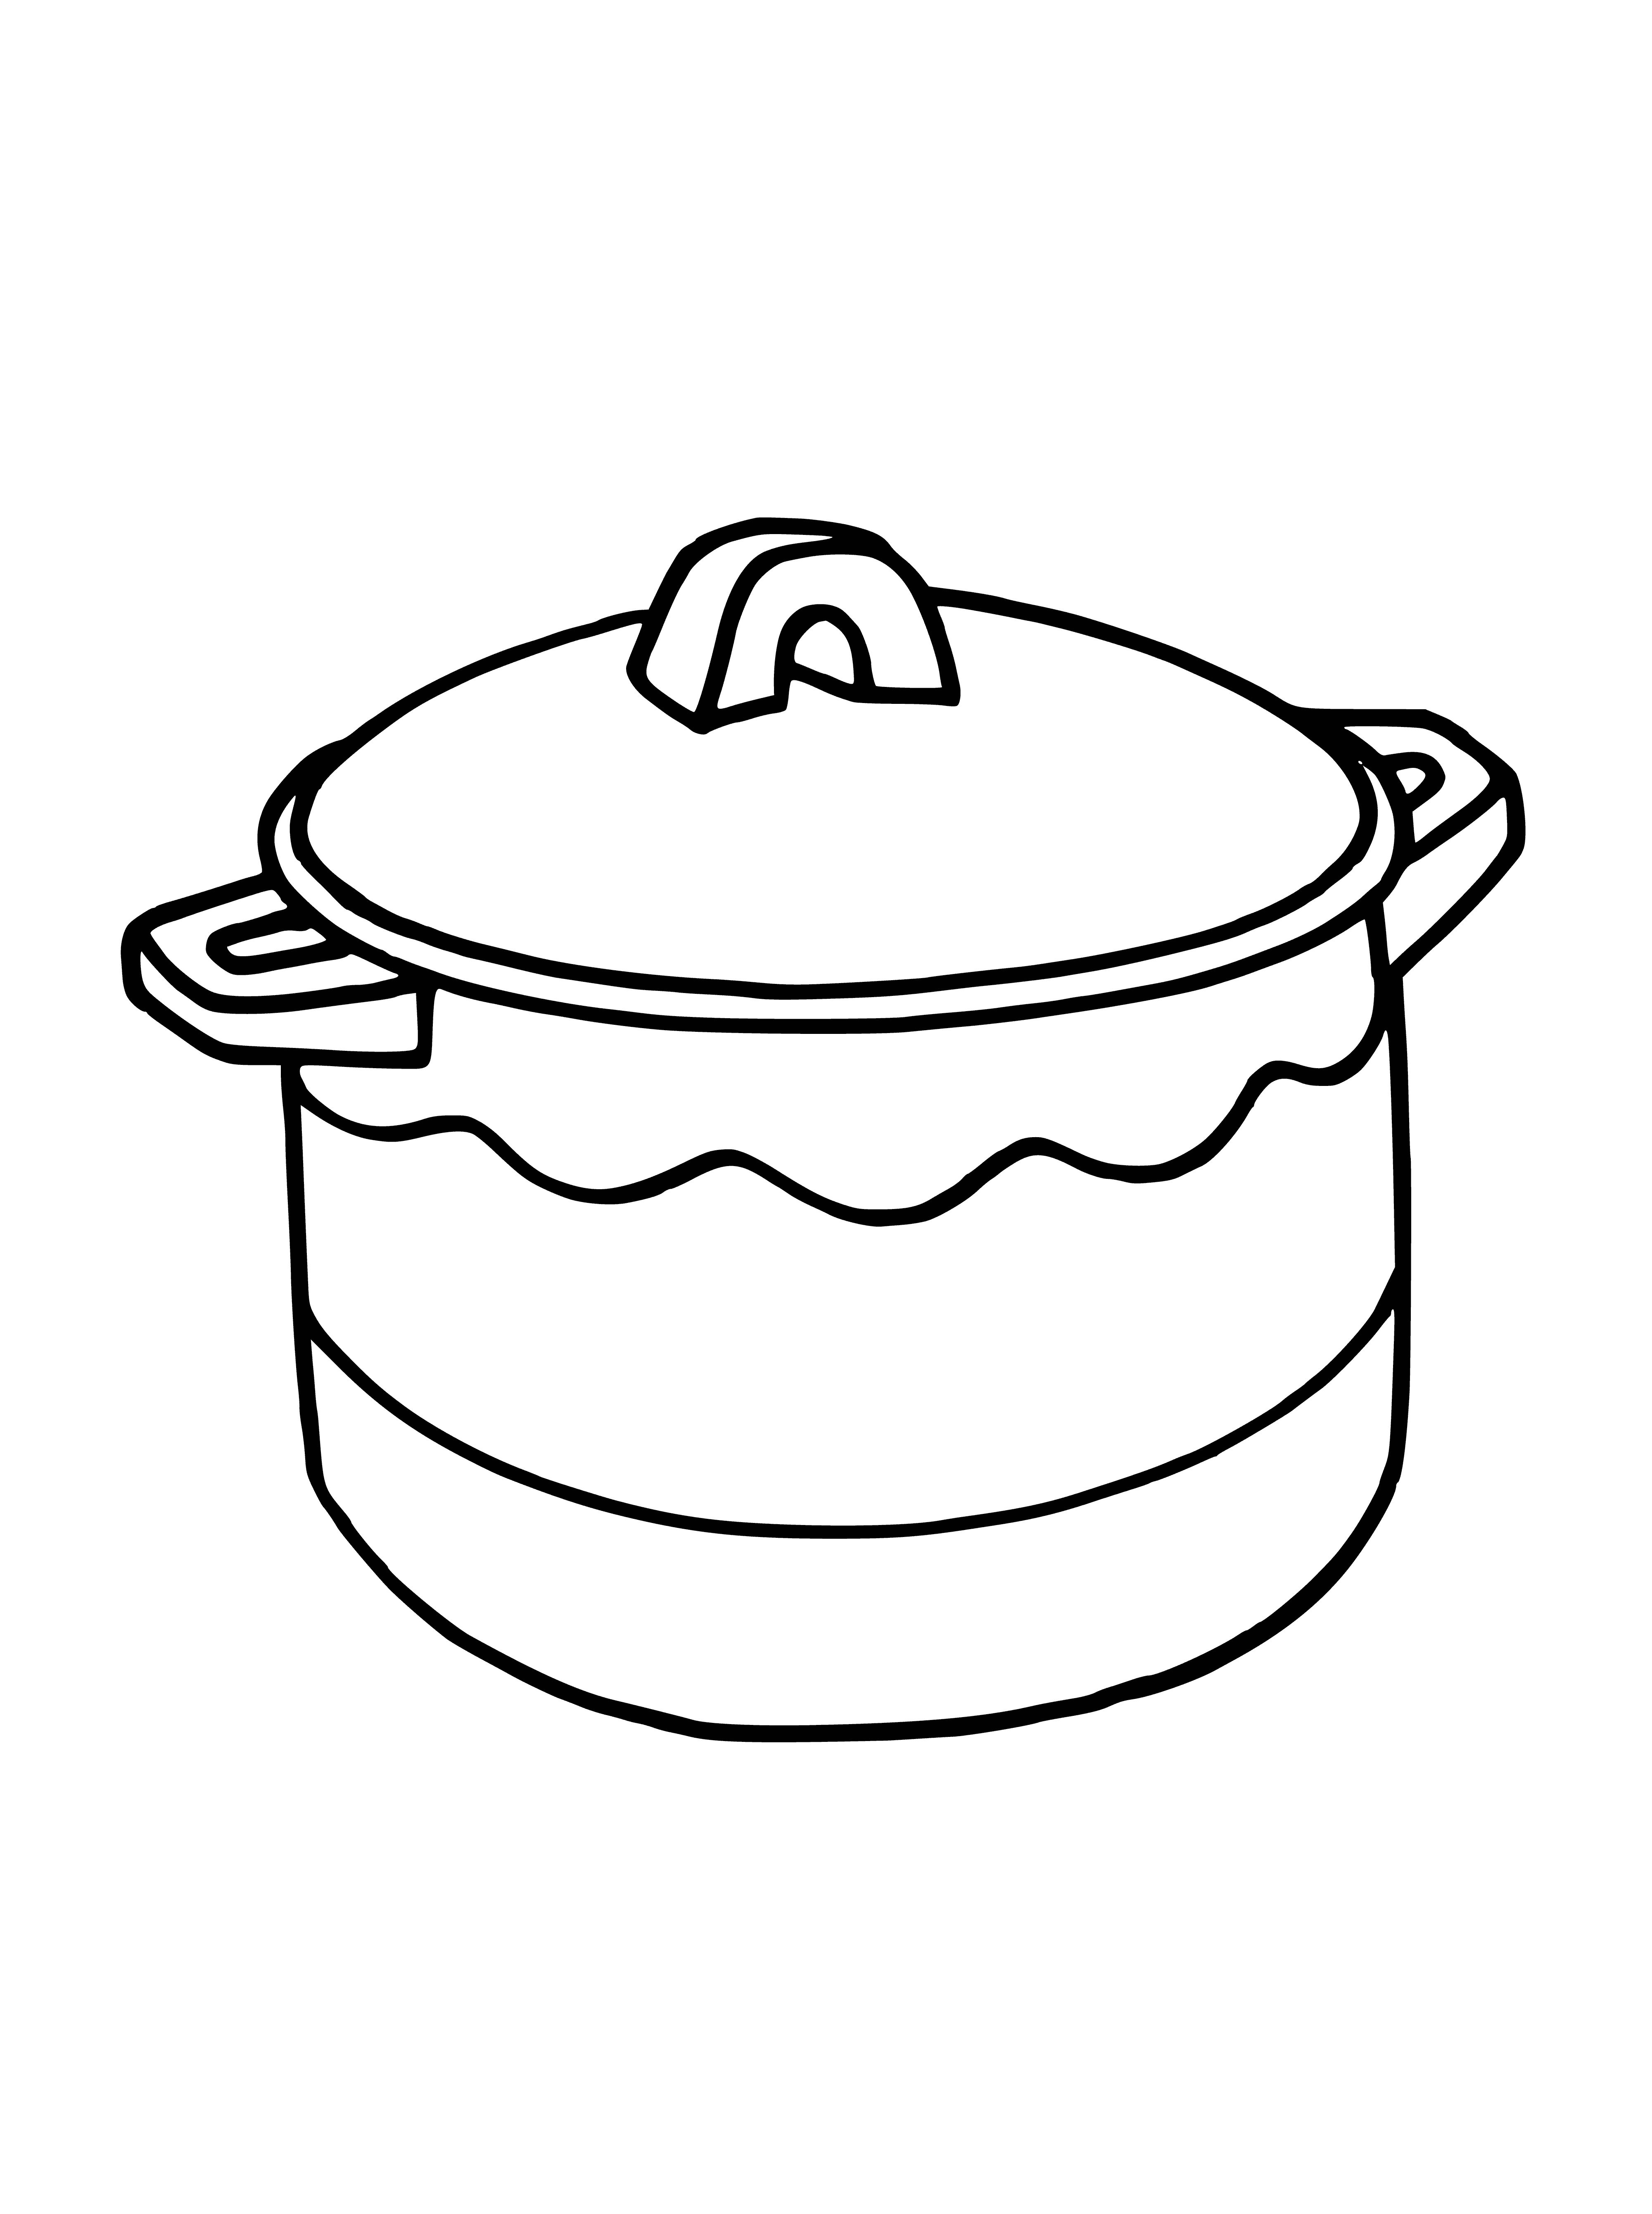 coloring page: Black pot with red design, long handle, small top; perfect for making soup!